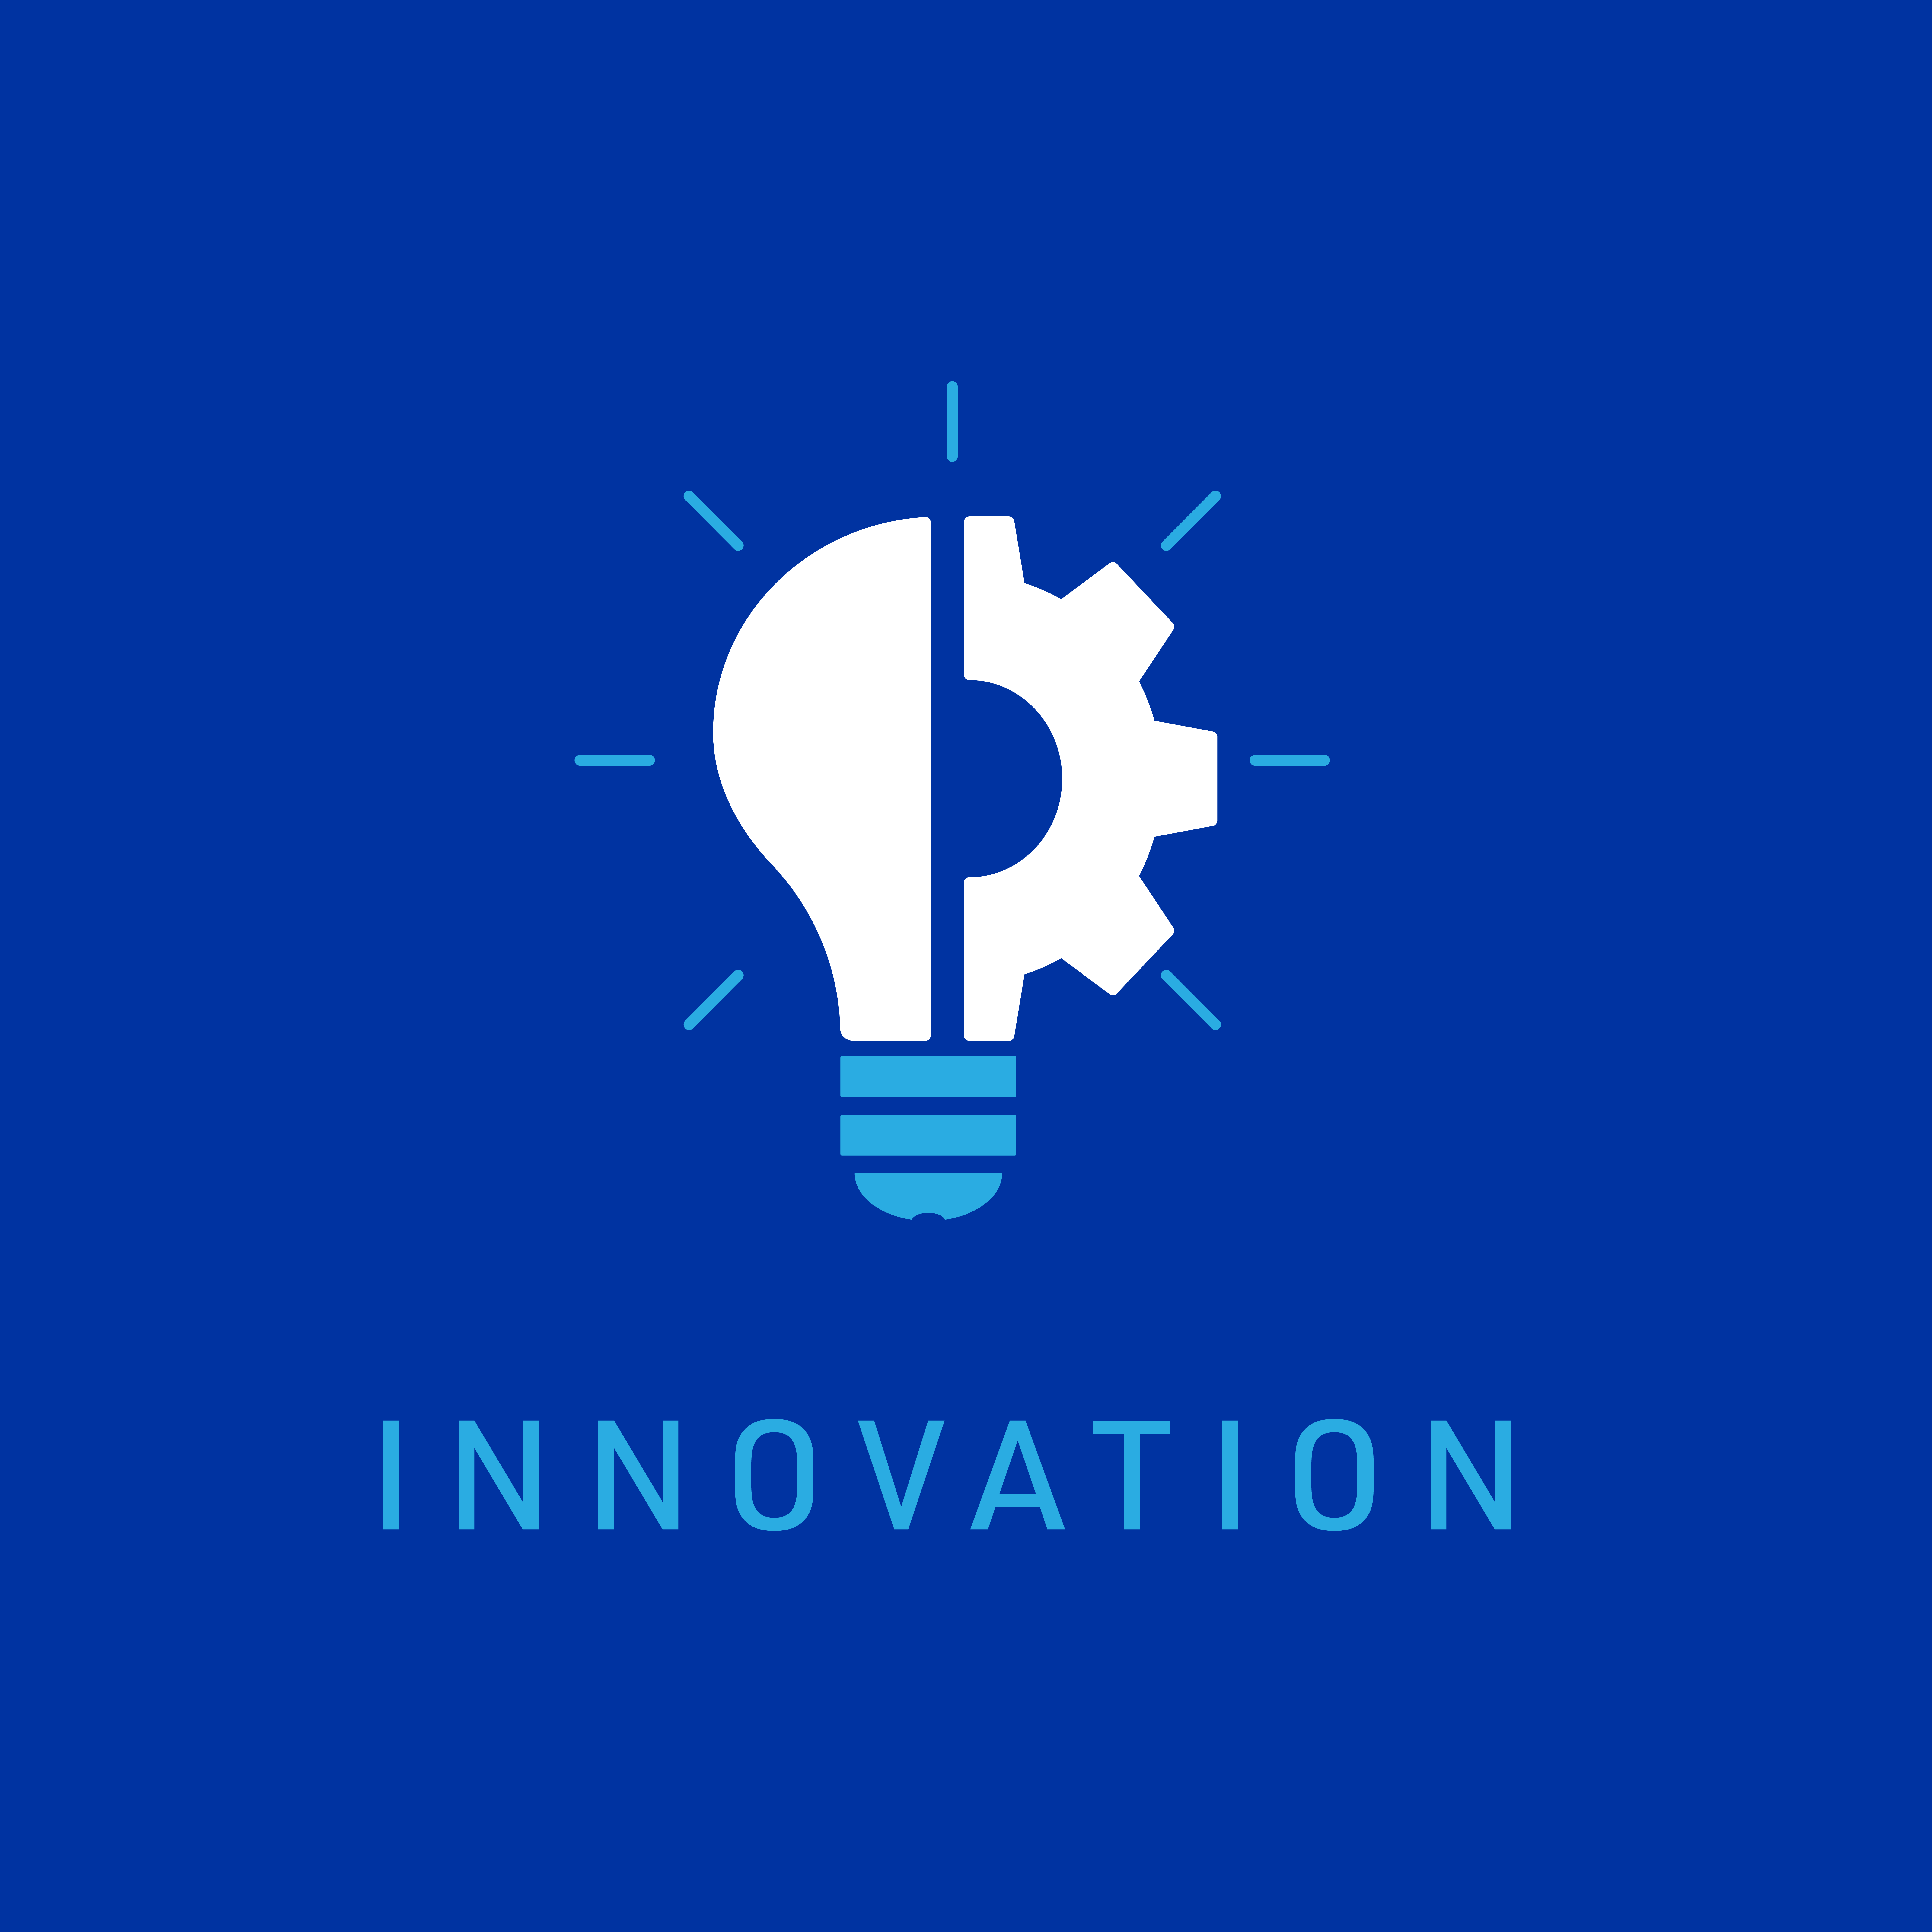 MiTek's guiding principle of innovation - A square graphic of light emanating from an object composed of a light bulb and a gear